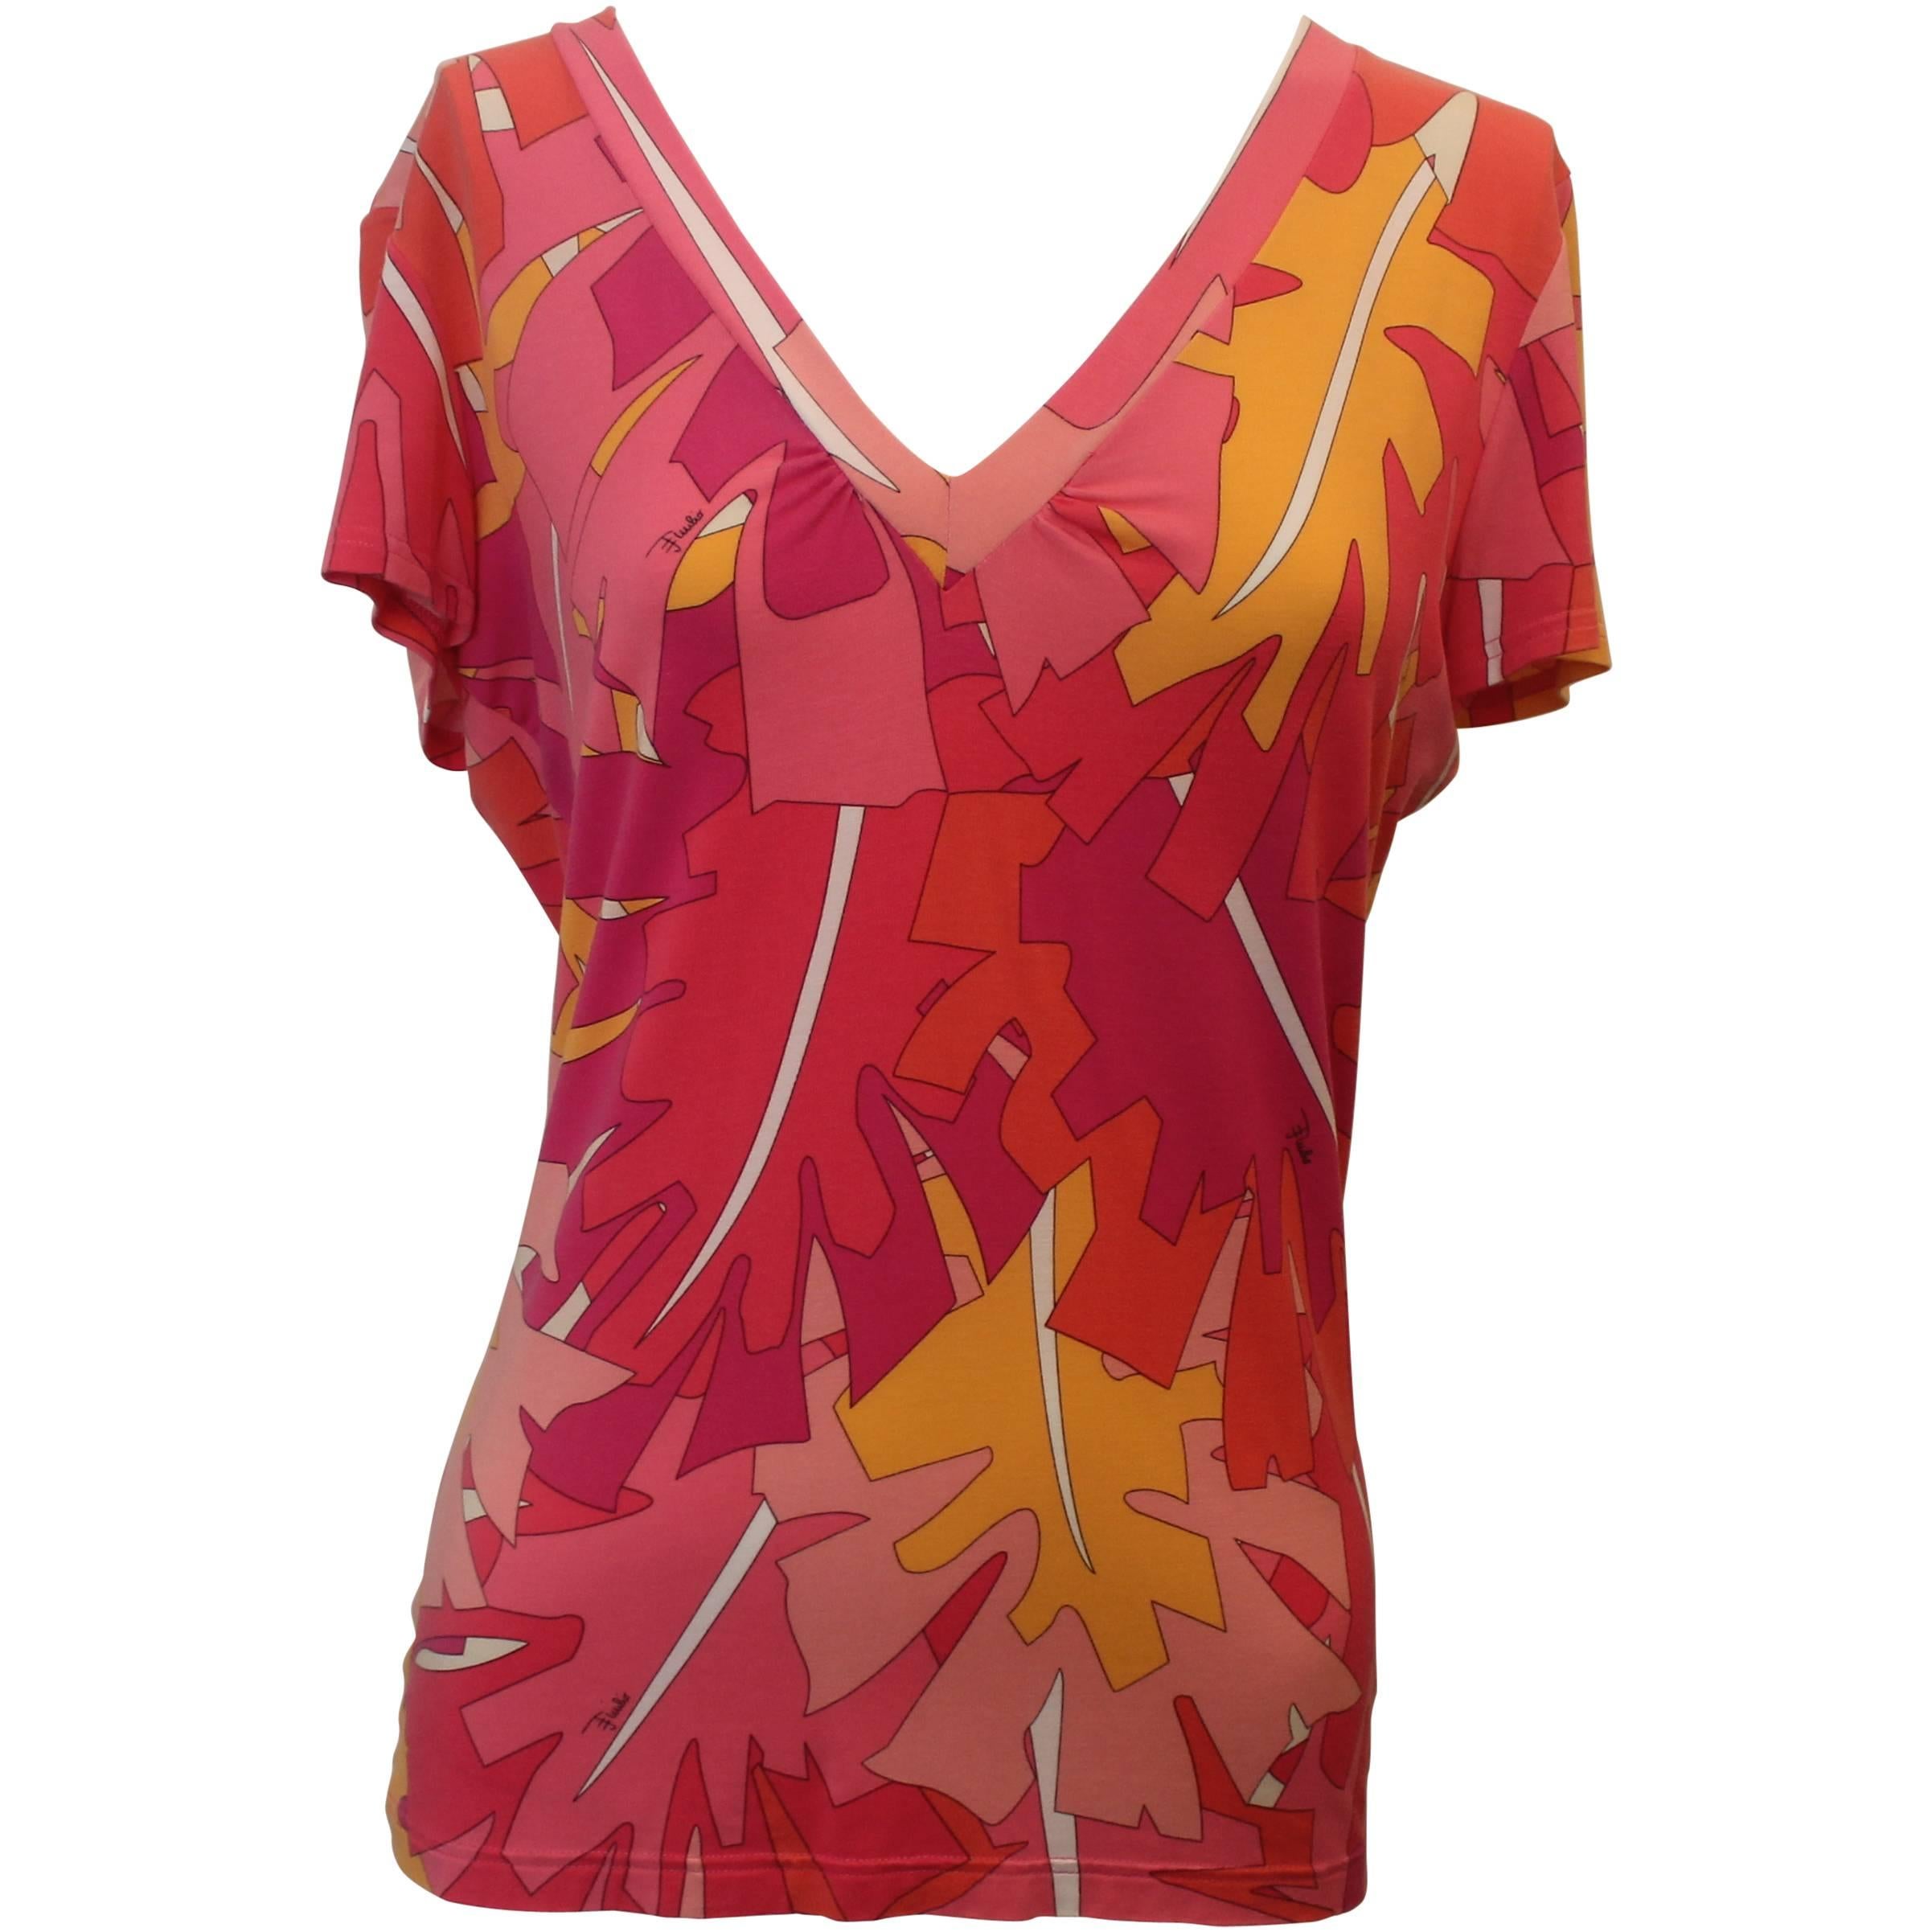 Emilio Pucci Pink and Orange Printed Synthetic Blend Short Sleeve V-Neck Top - L